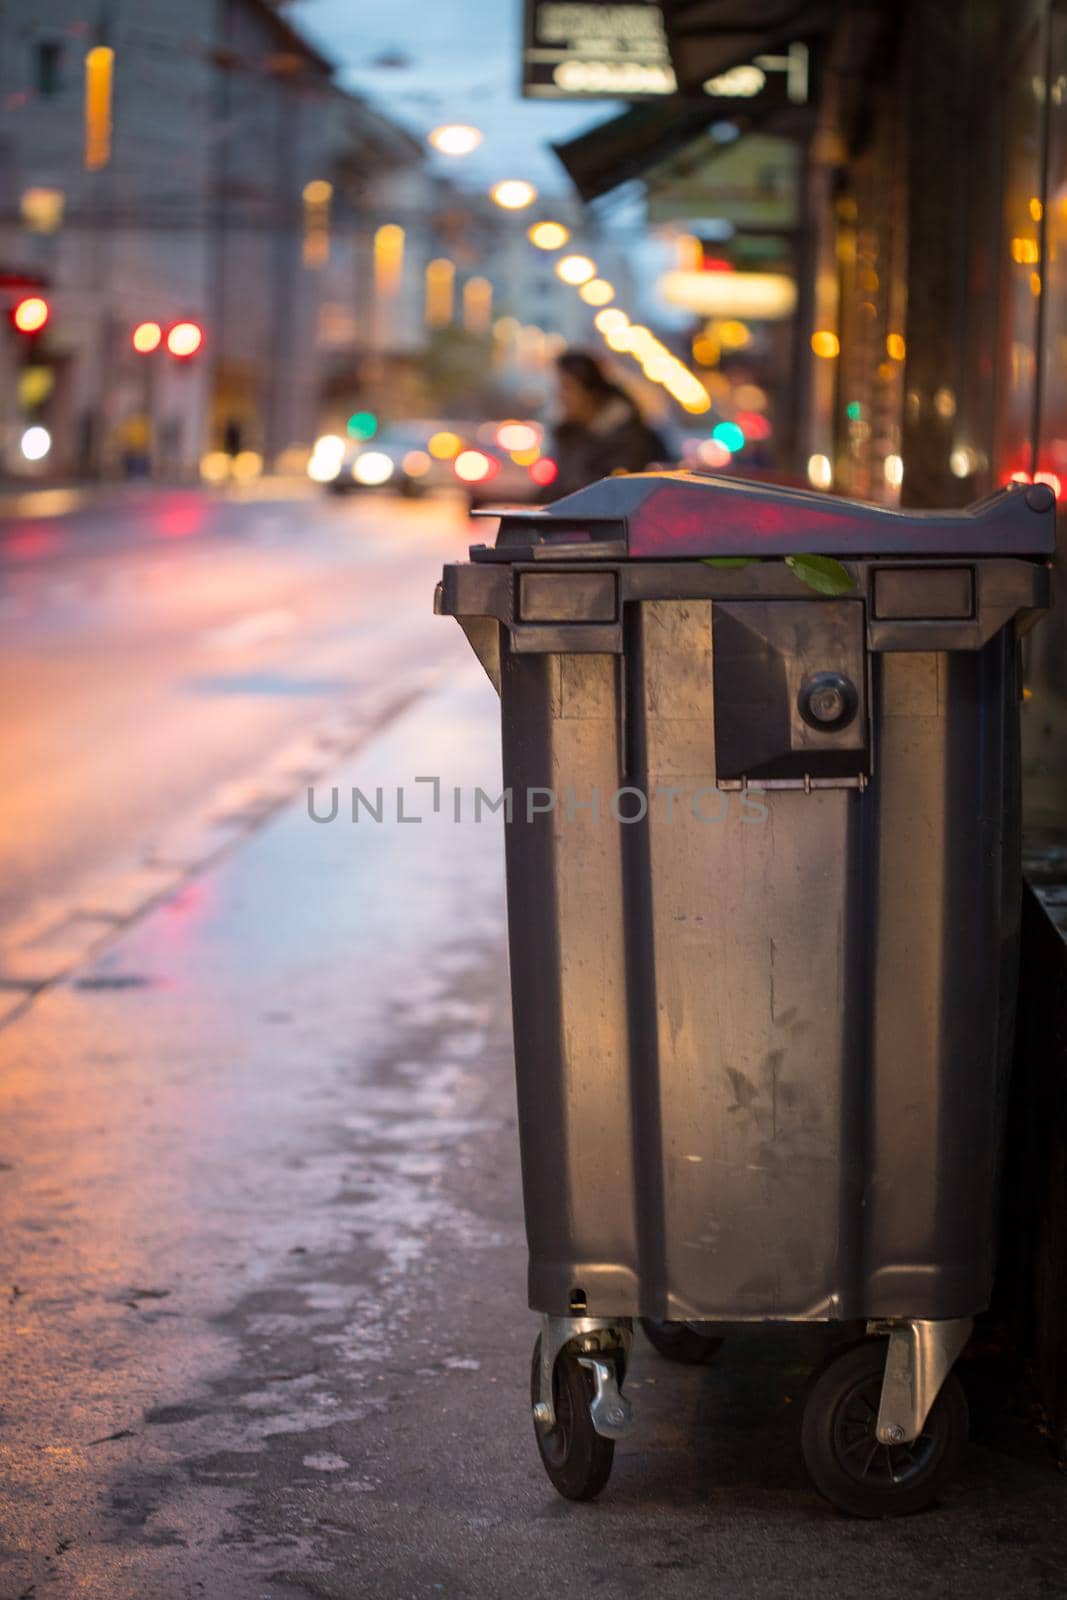 Garbage cans and street lights in urban city, evening by Daxenbichler